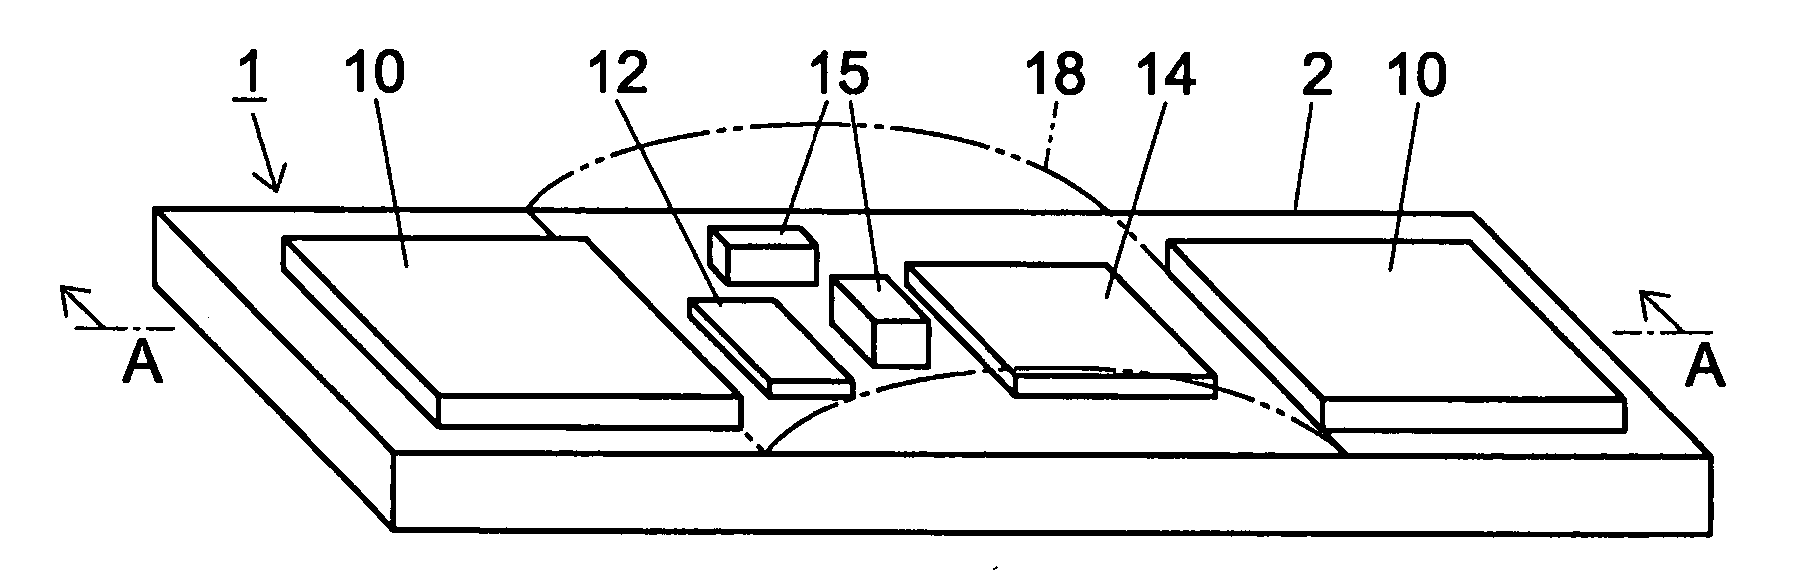 Protection circuit module for a secondary battery and a battery package using same